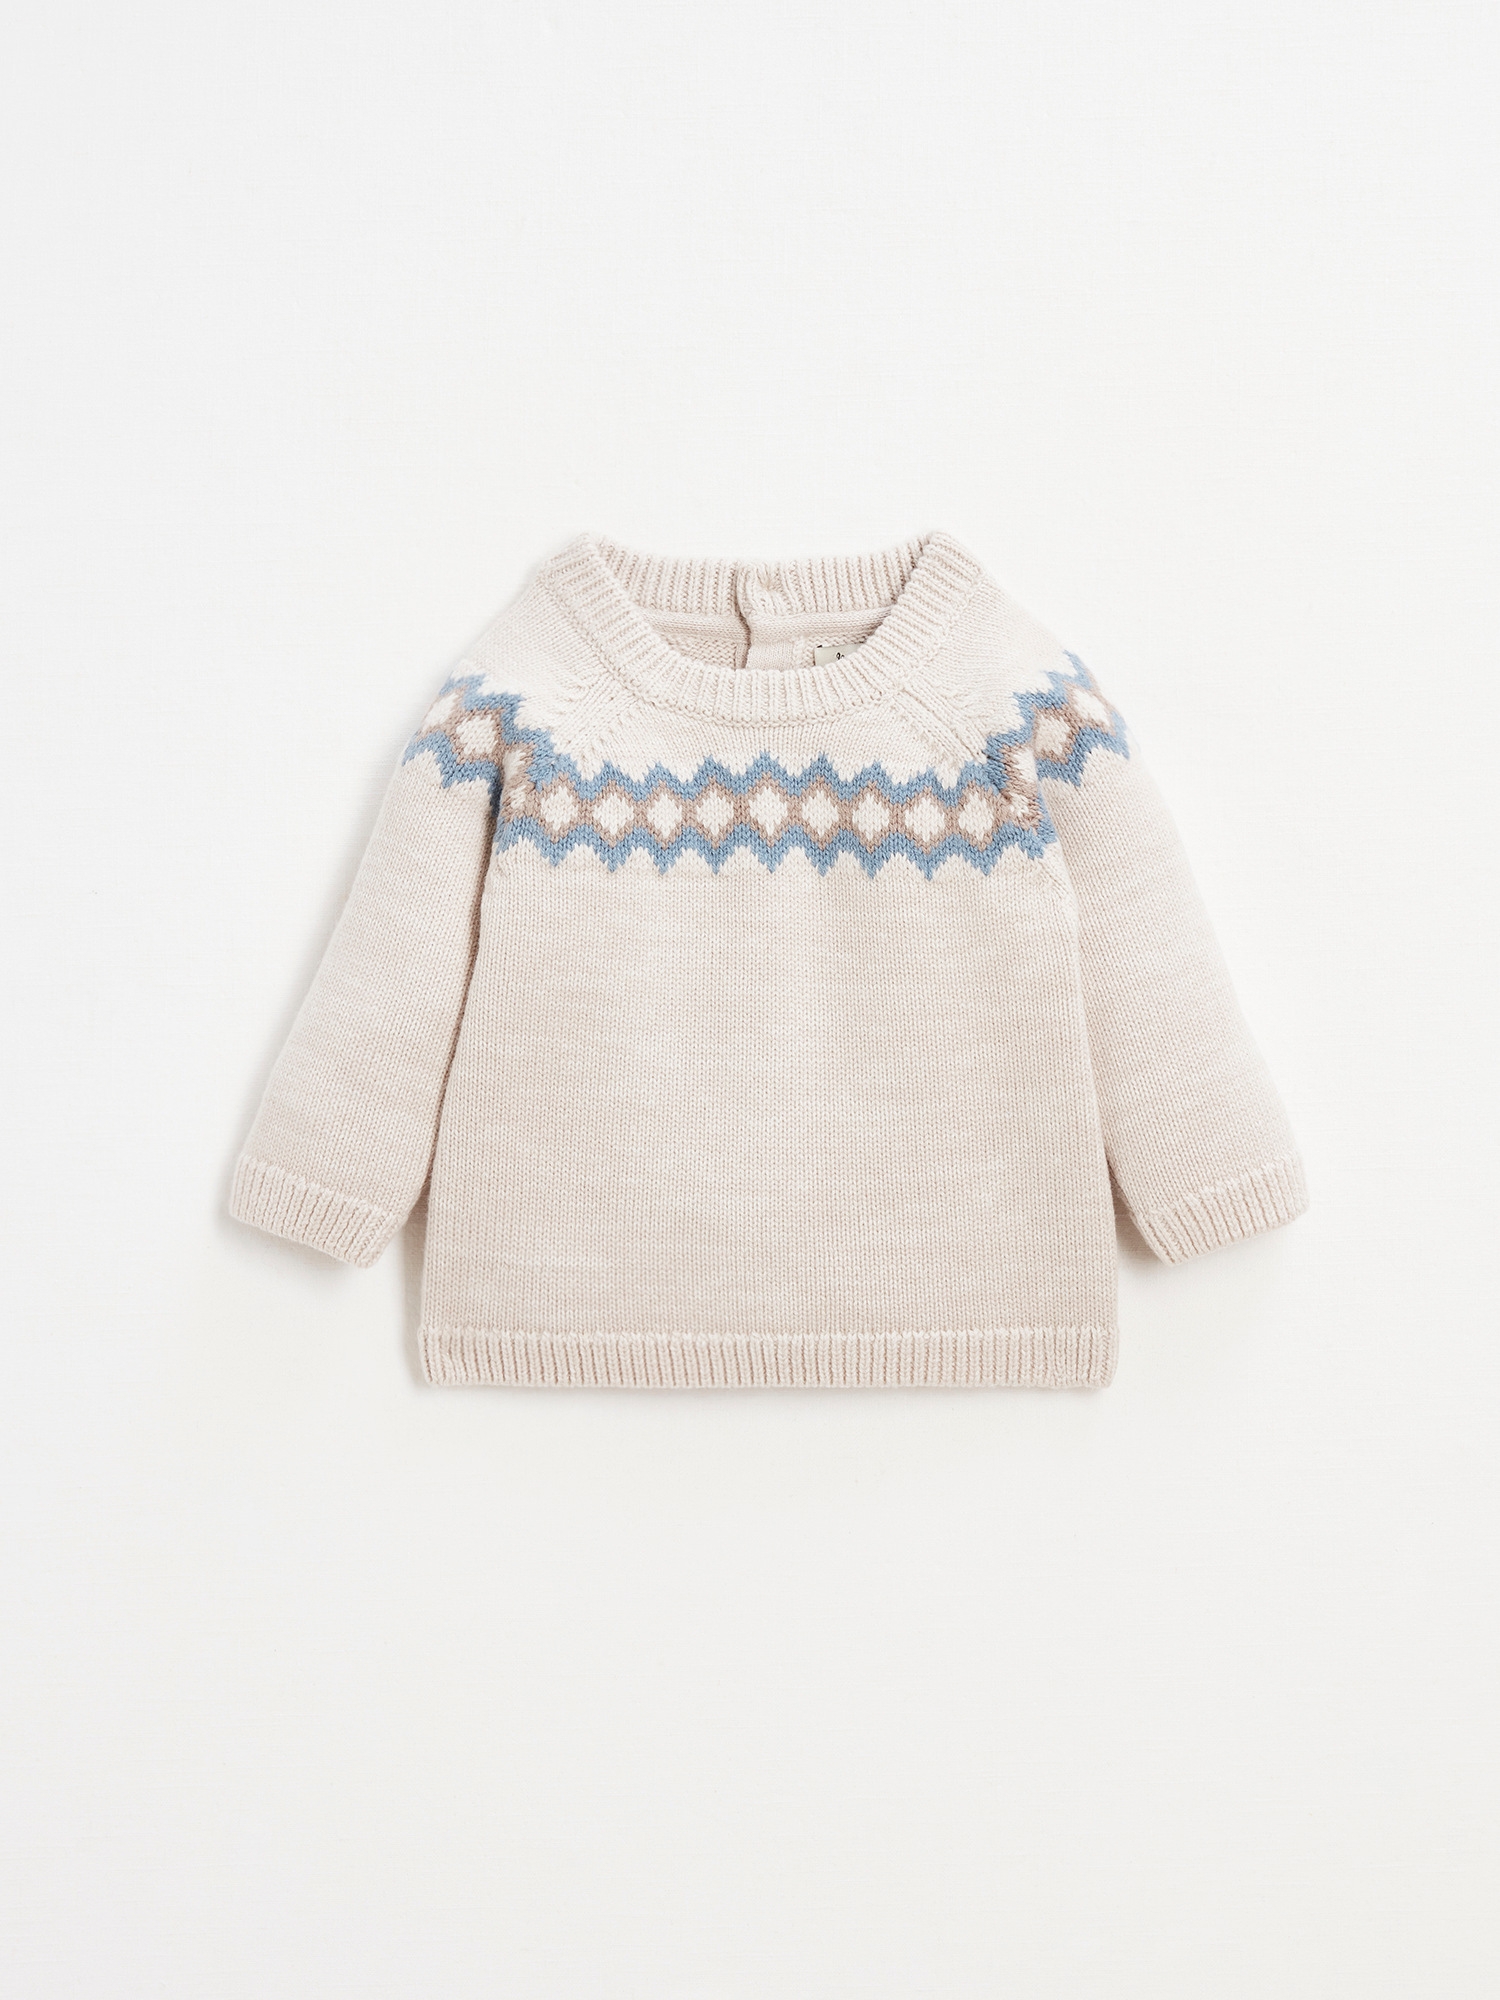  Sweater knit child with jacquard pattern in absorbent cotton 